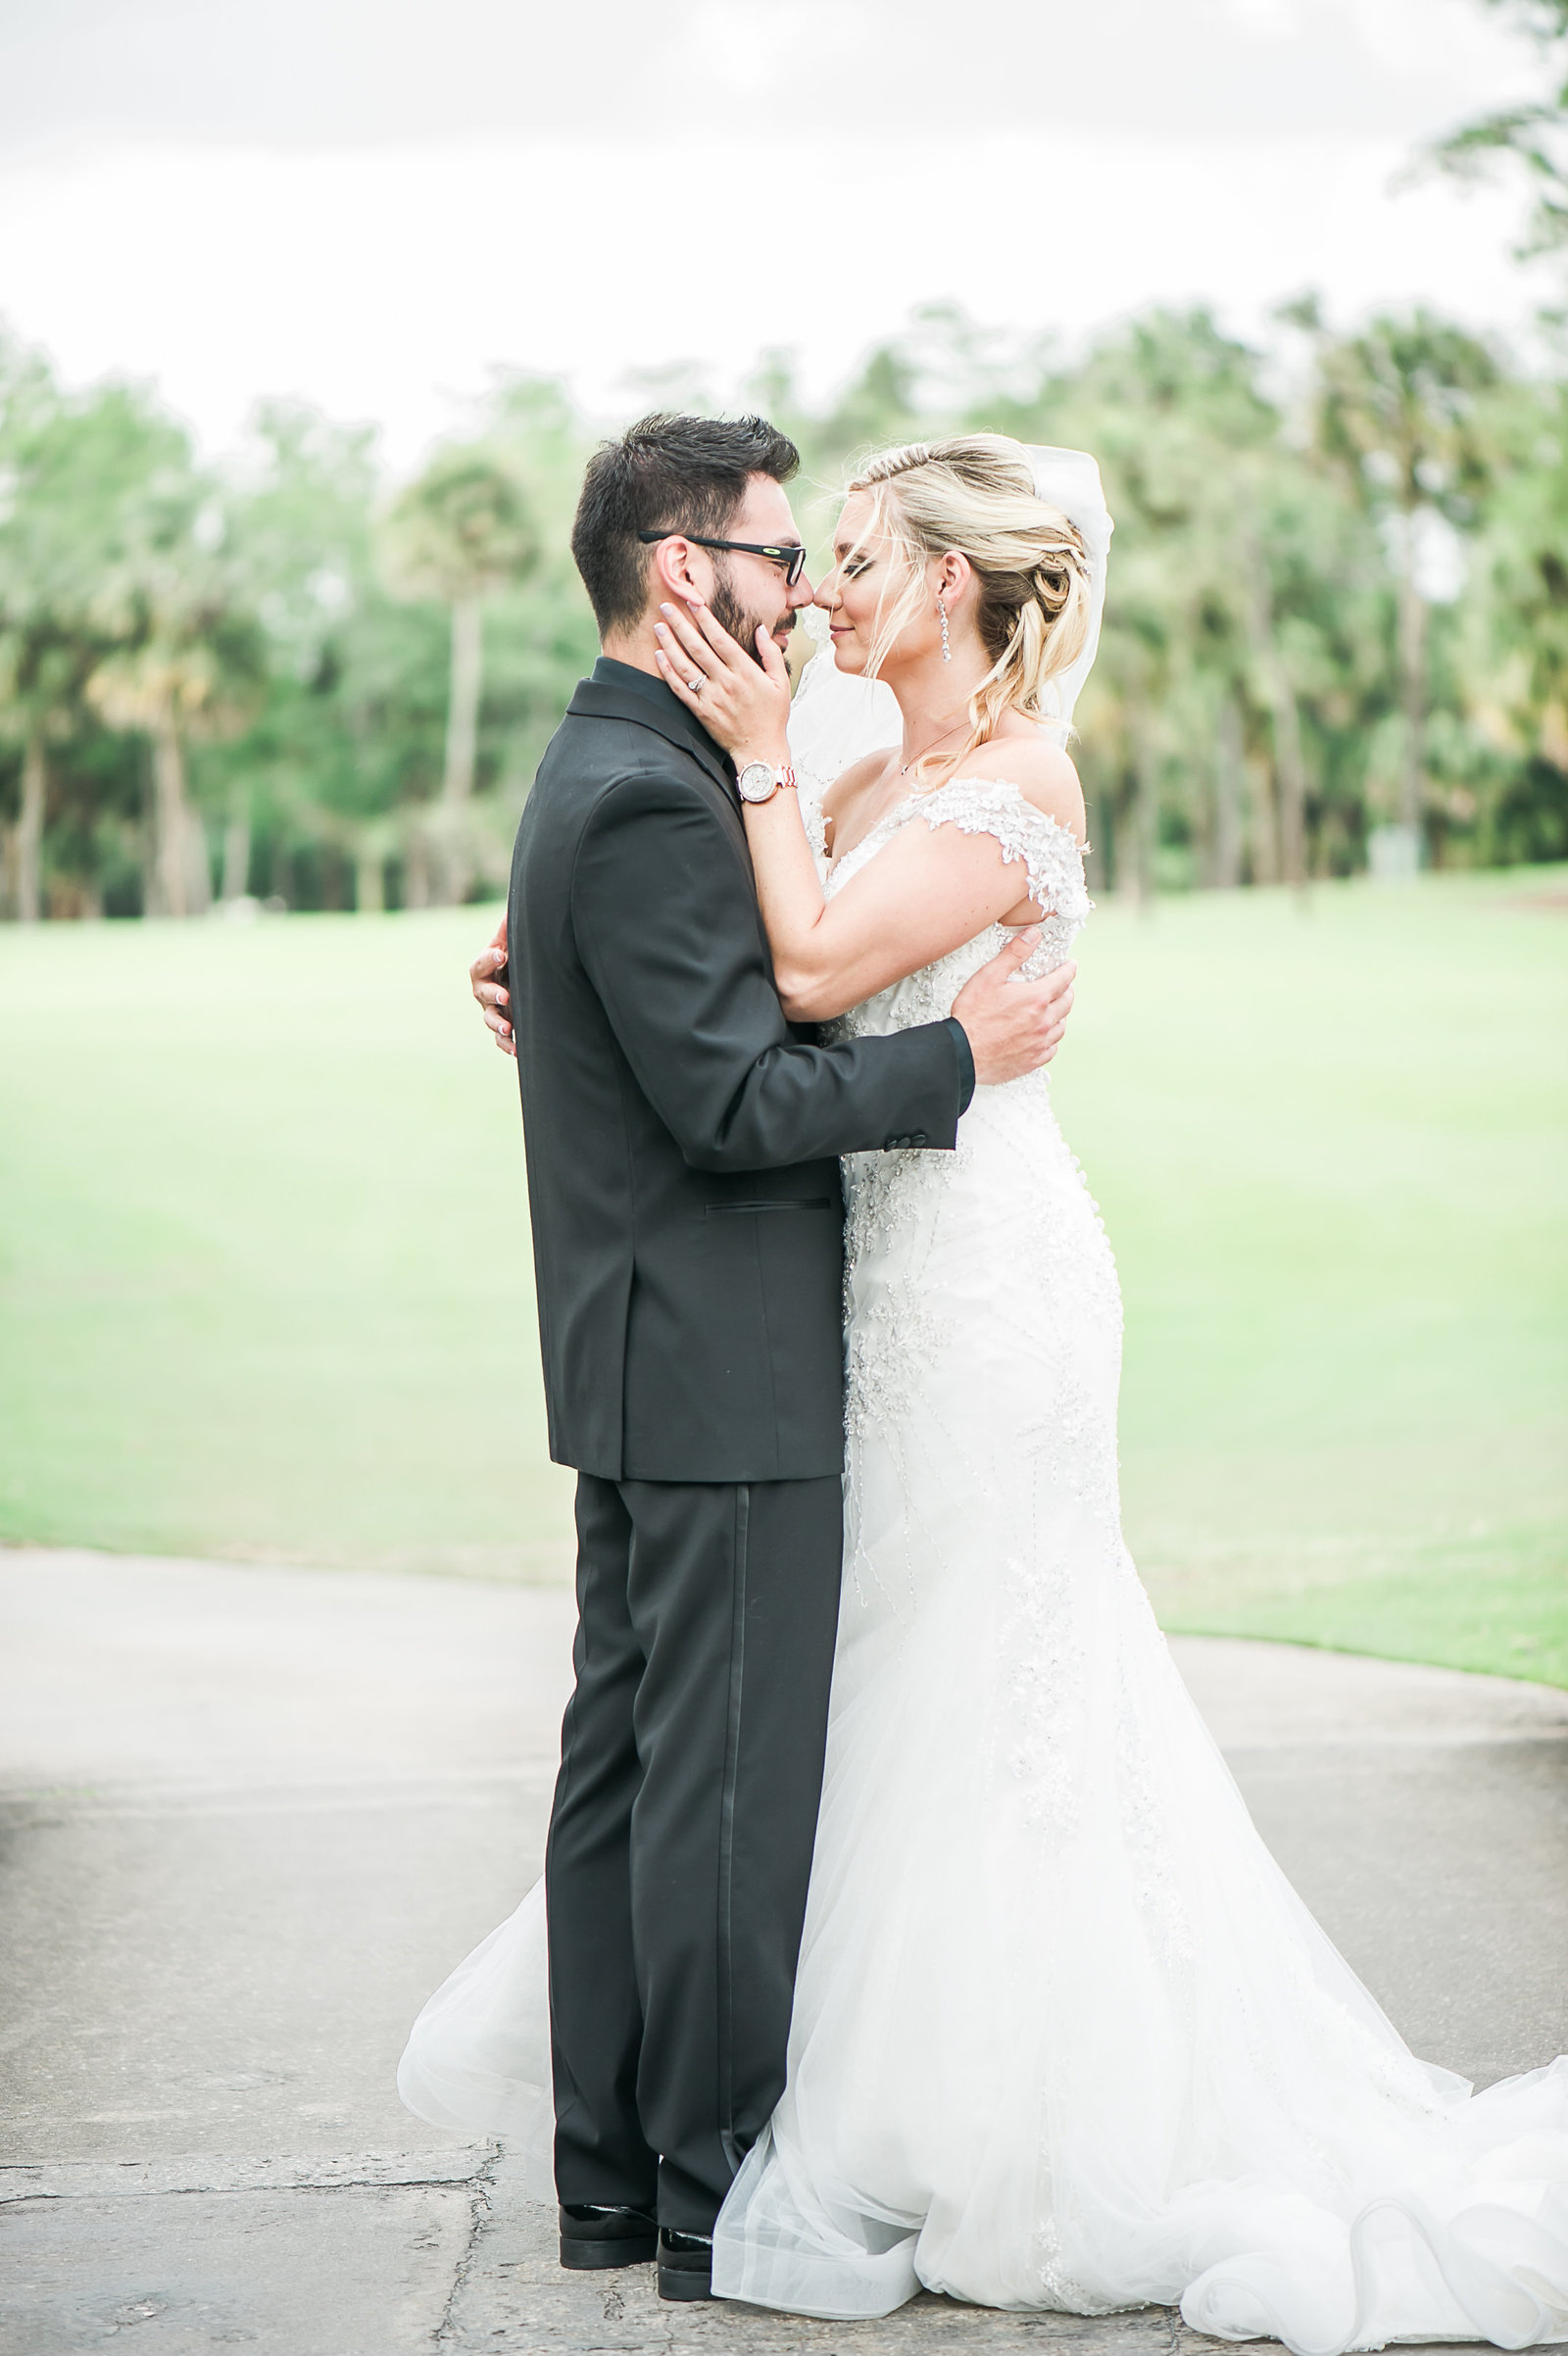 Kissing Bride and Groom - Myacoo Country Club Wedding - Palm Beach Wedding Photography by Palm Beach Photography, Inc.